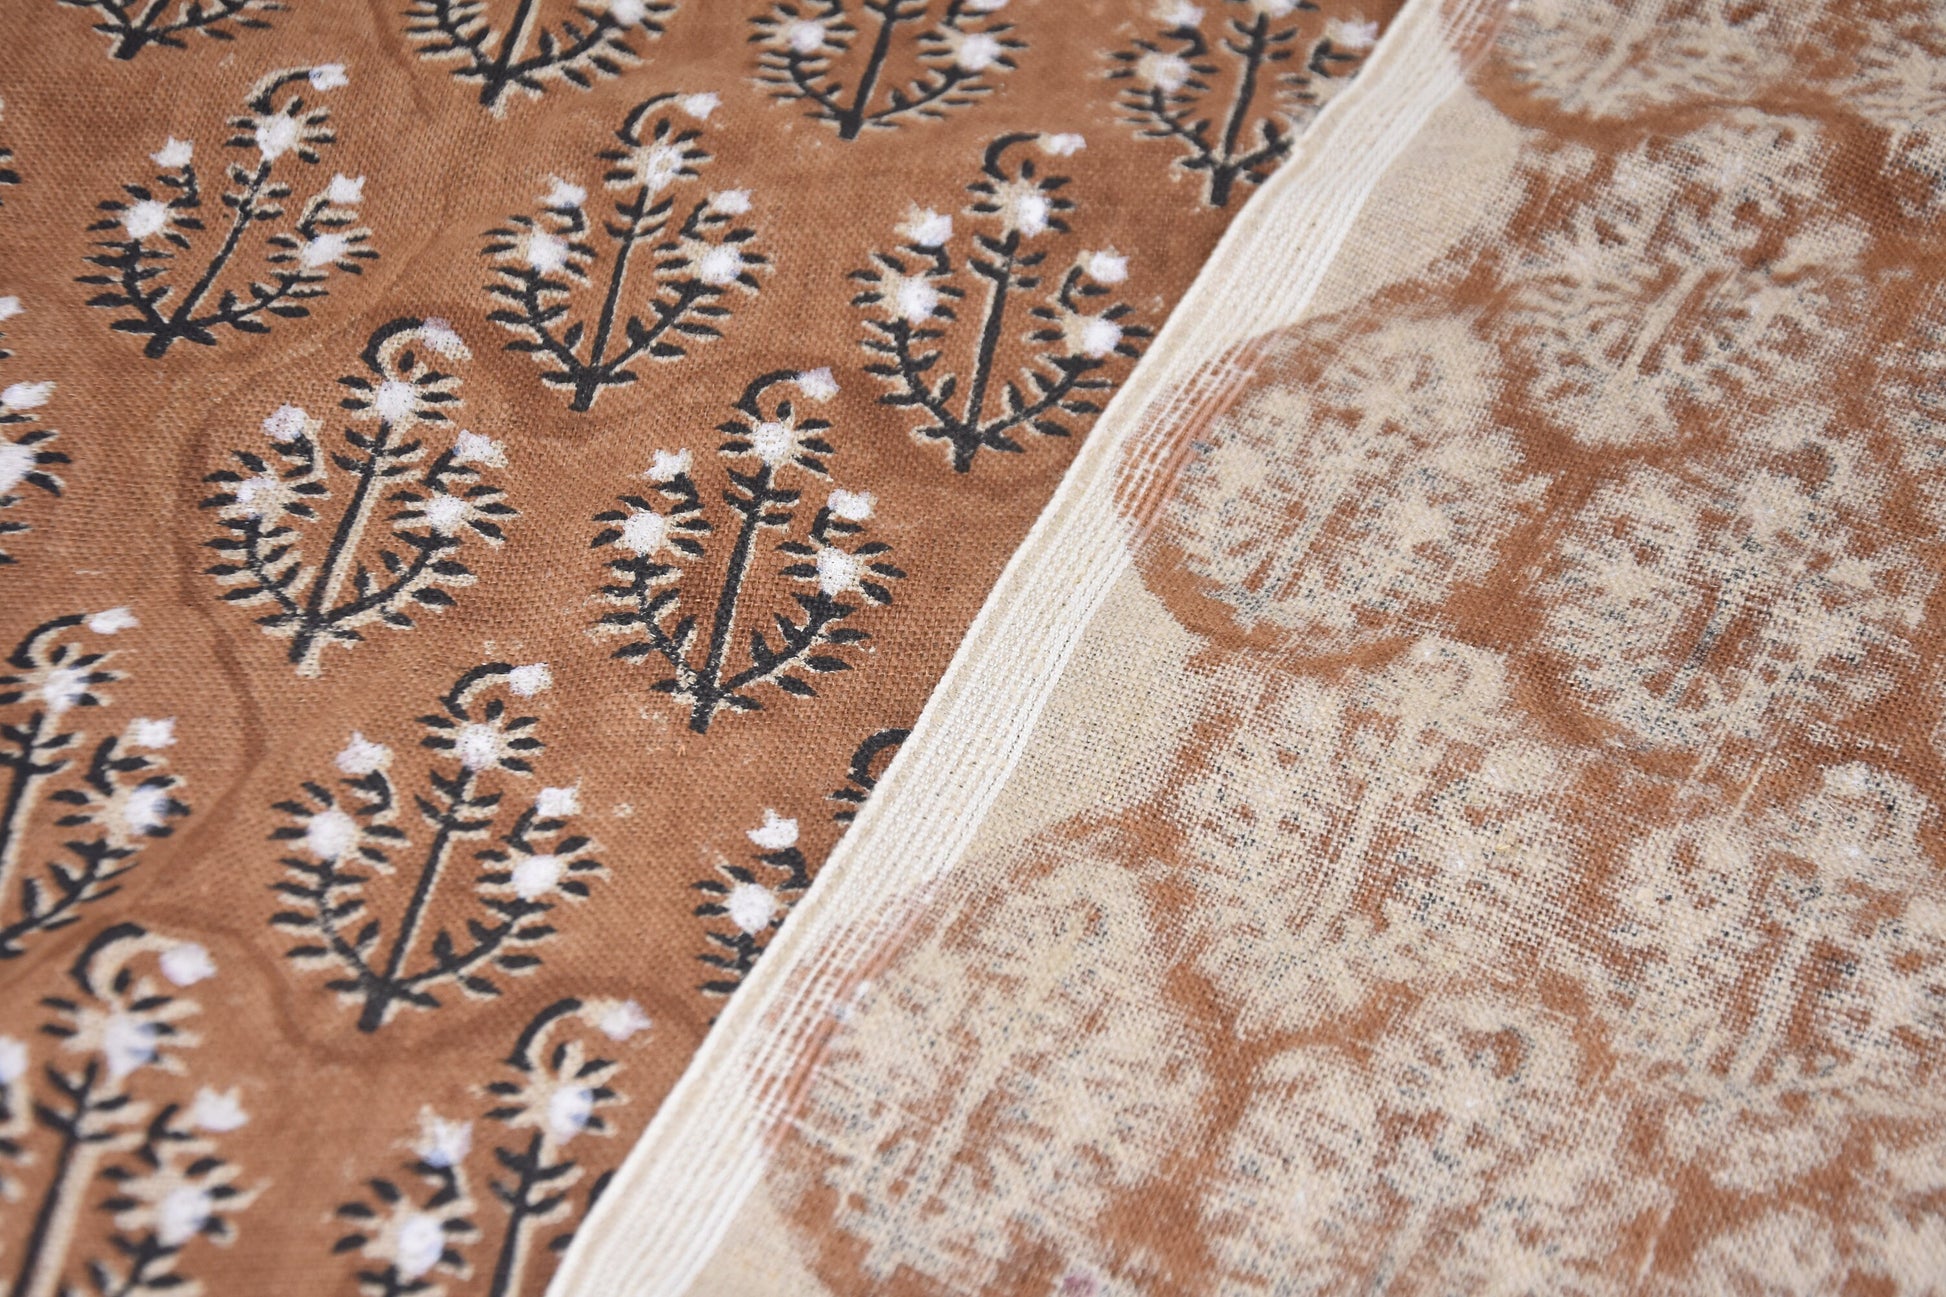 Block print Thick linen 58" wide, Indian fabric, floral print pillow cover, table cloth, handloom curtains, linen by yards - NEEL GAGAN